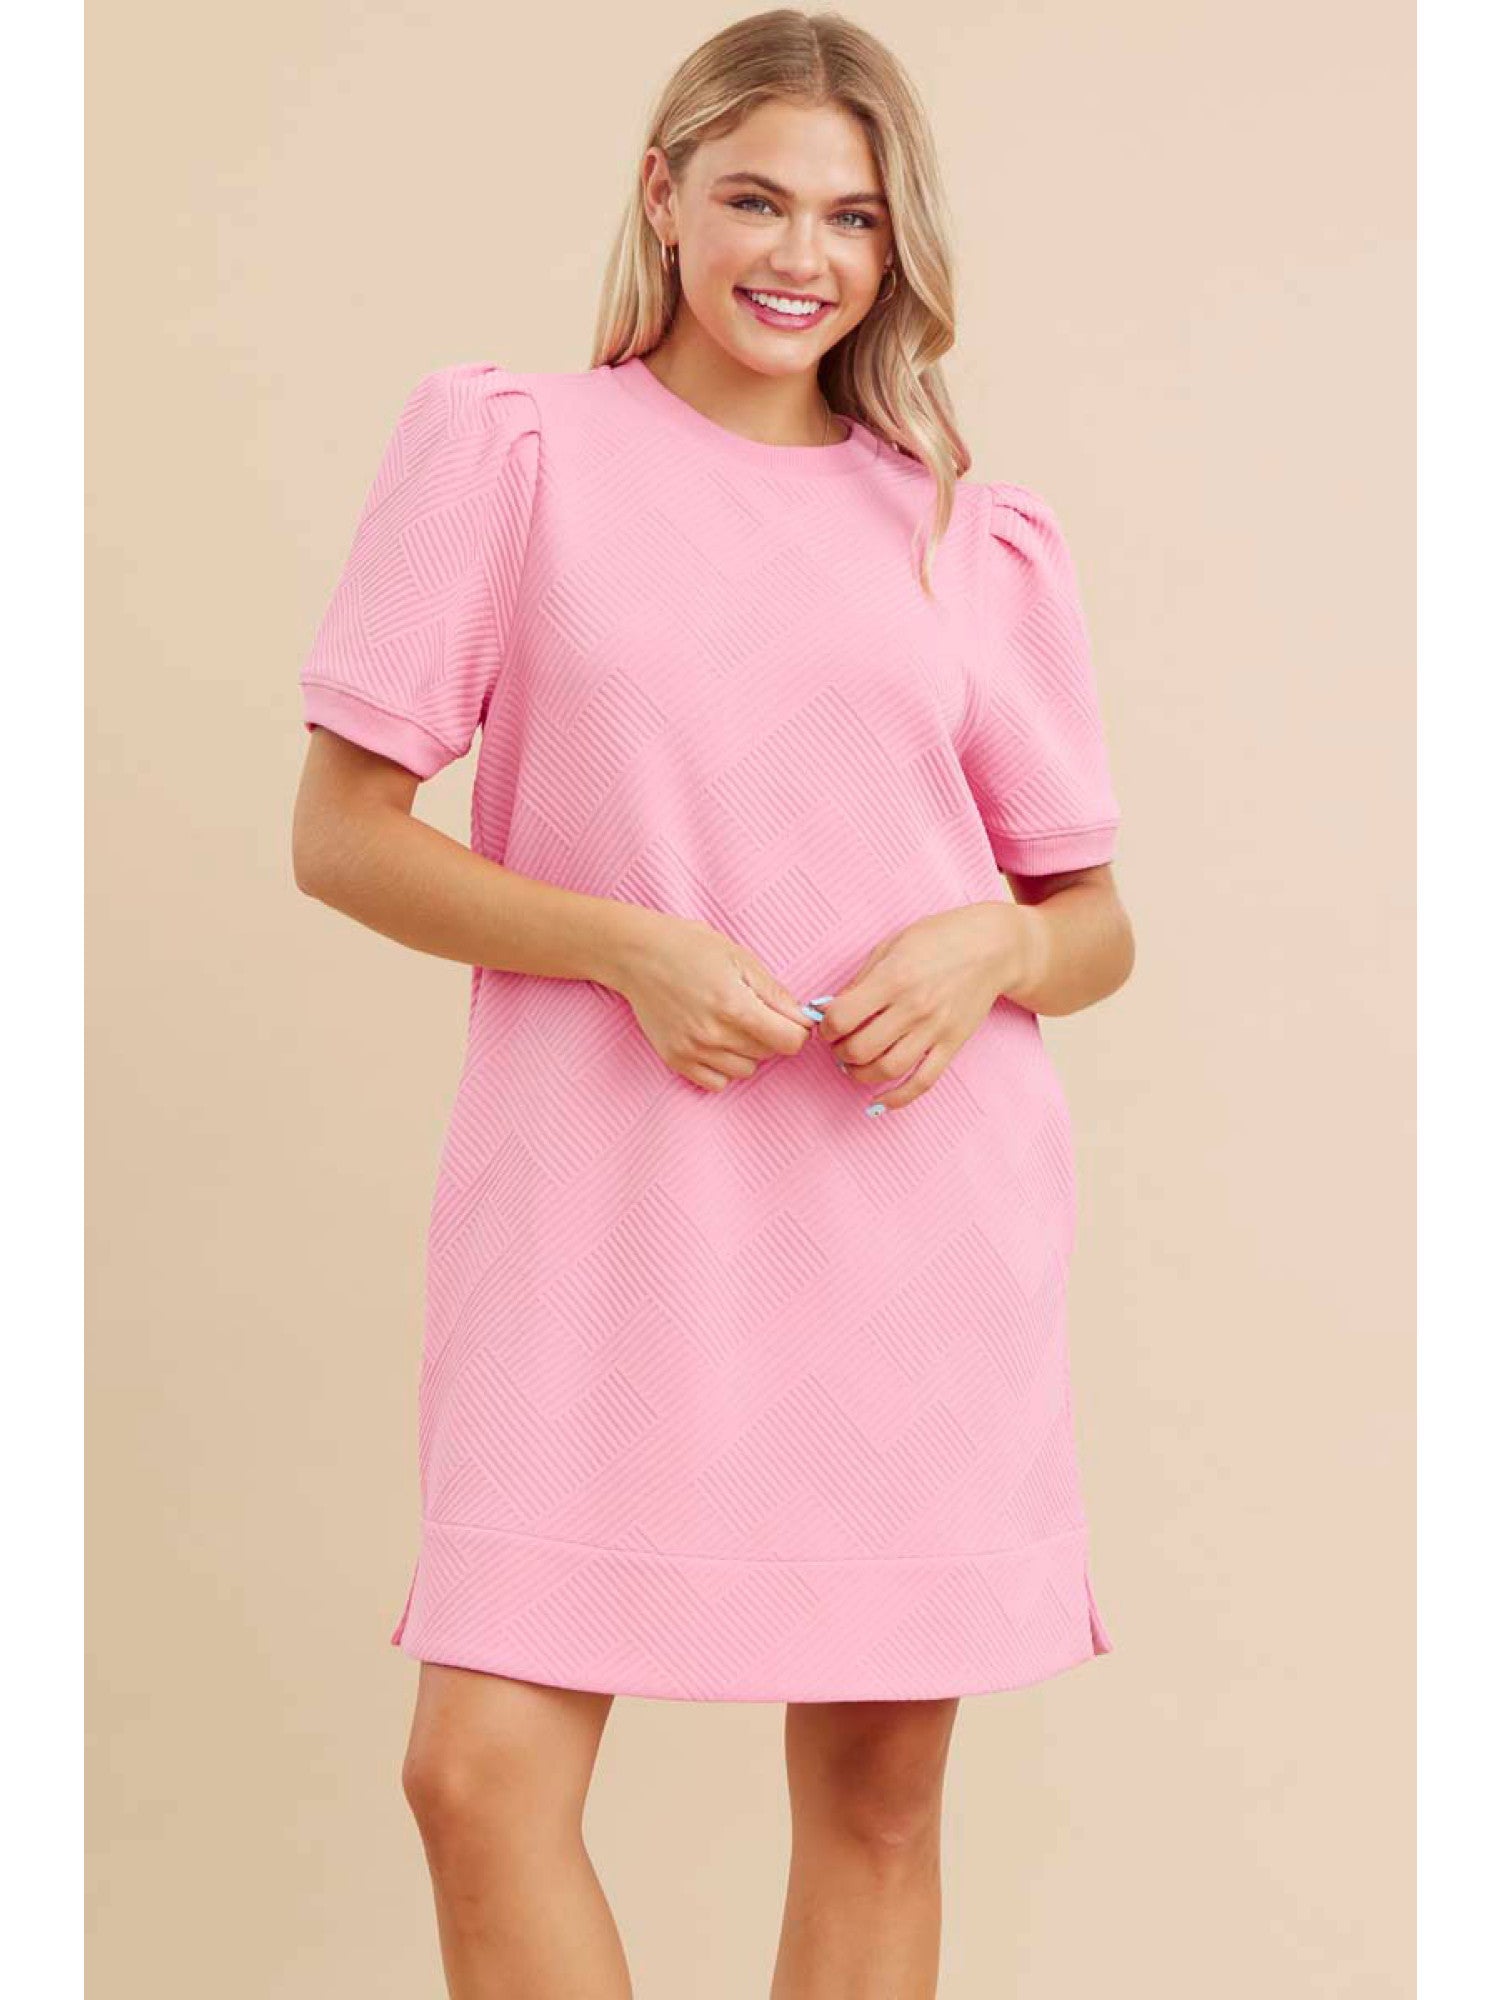 Perfectly Pink Textured Dress